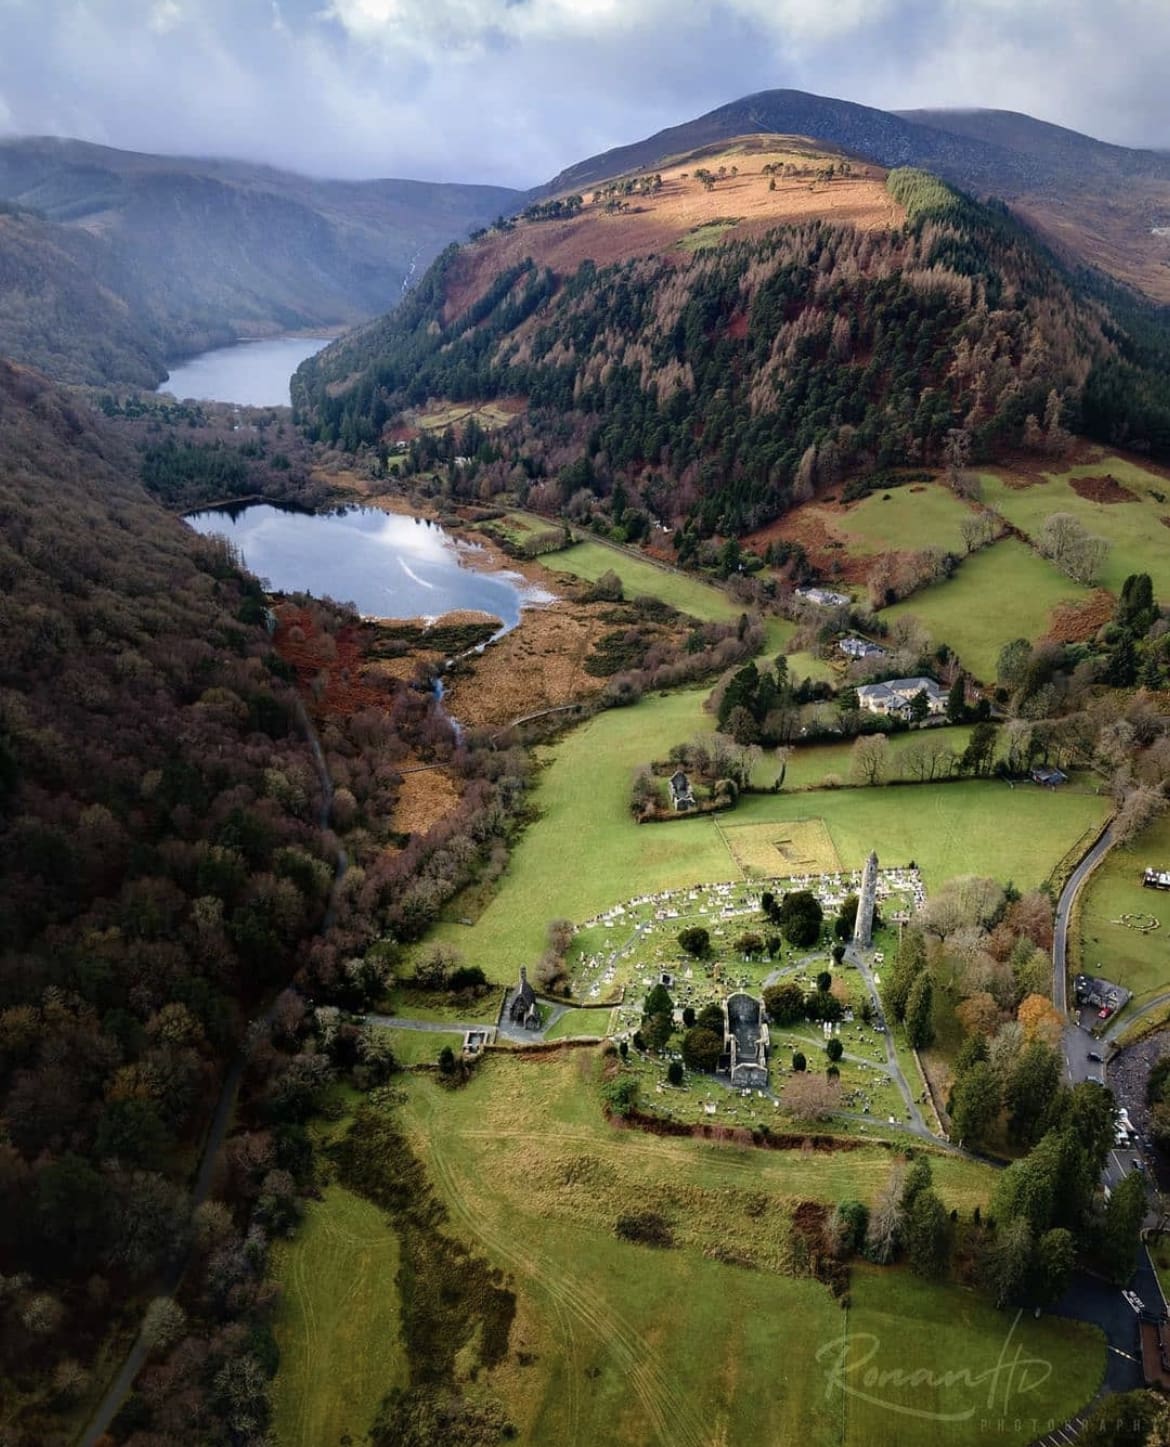 Dreamy village scenes in the Wicklow Mountains - The 22 Best Things to do in Ireland